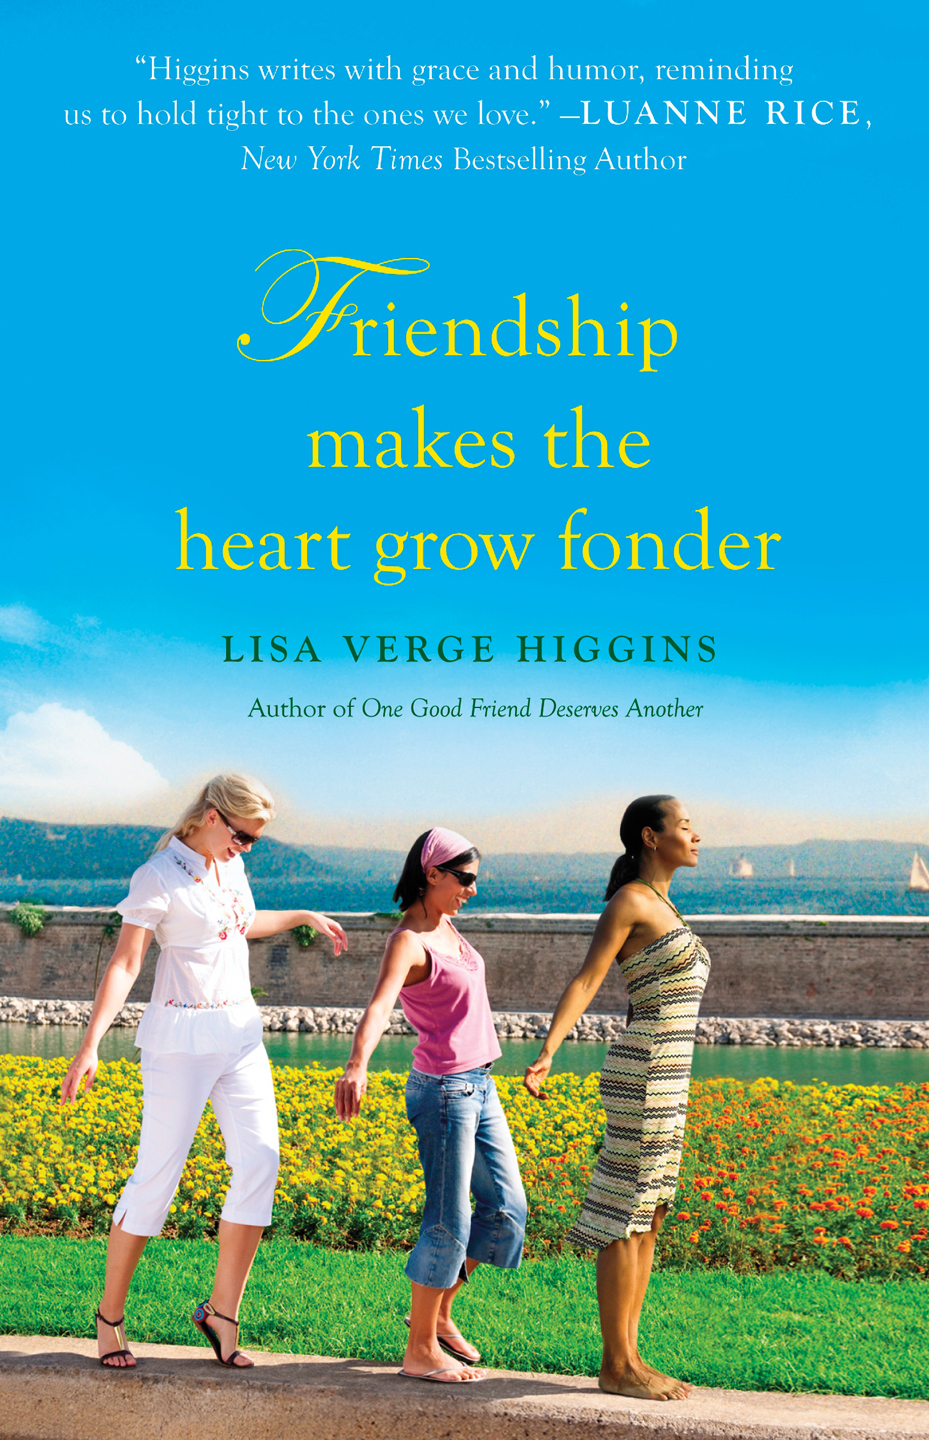 Friendship makes the heart grow fonder book cover April 13 p178